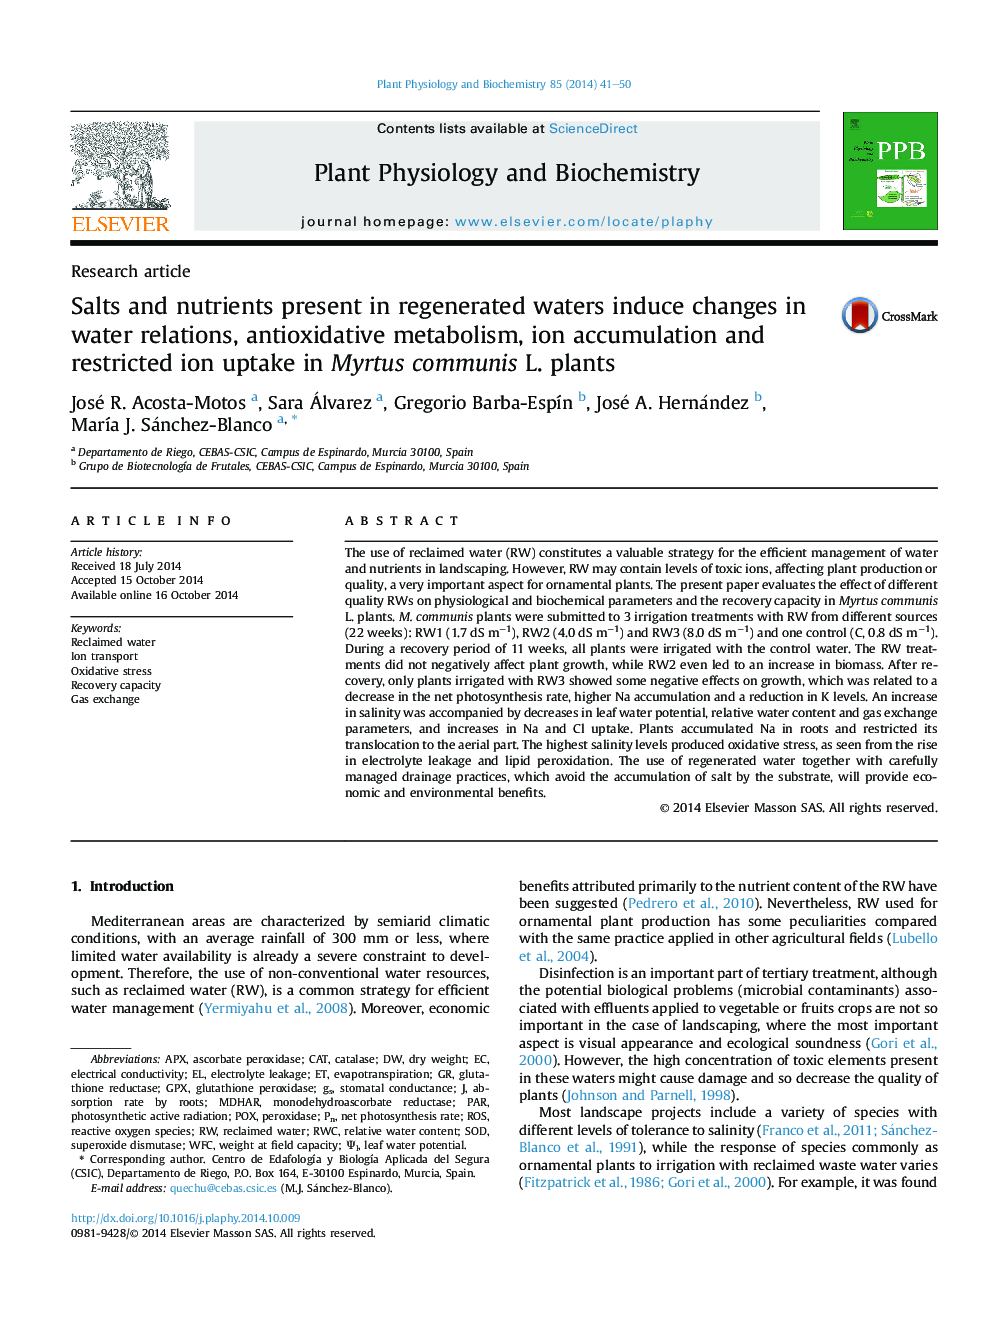 Salts and nutrients present in regenerated waters induce changes in water relations, antioxidative metabolism, ion accumulation and restricted ion uptake in Myrtus communis L. plants